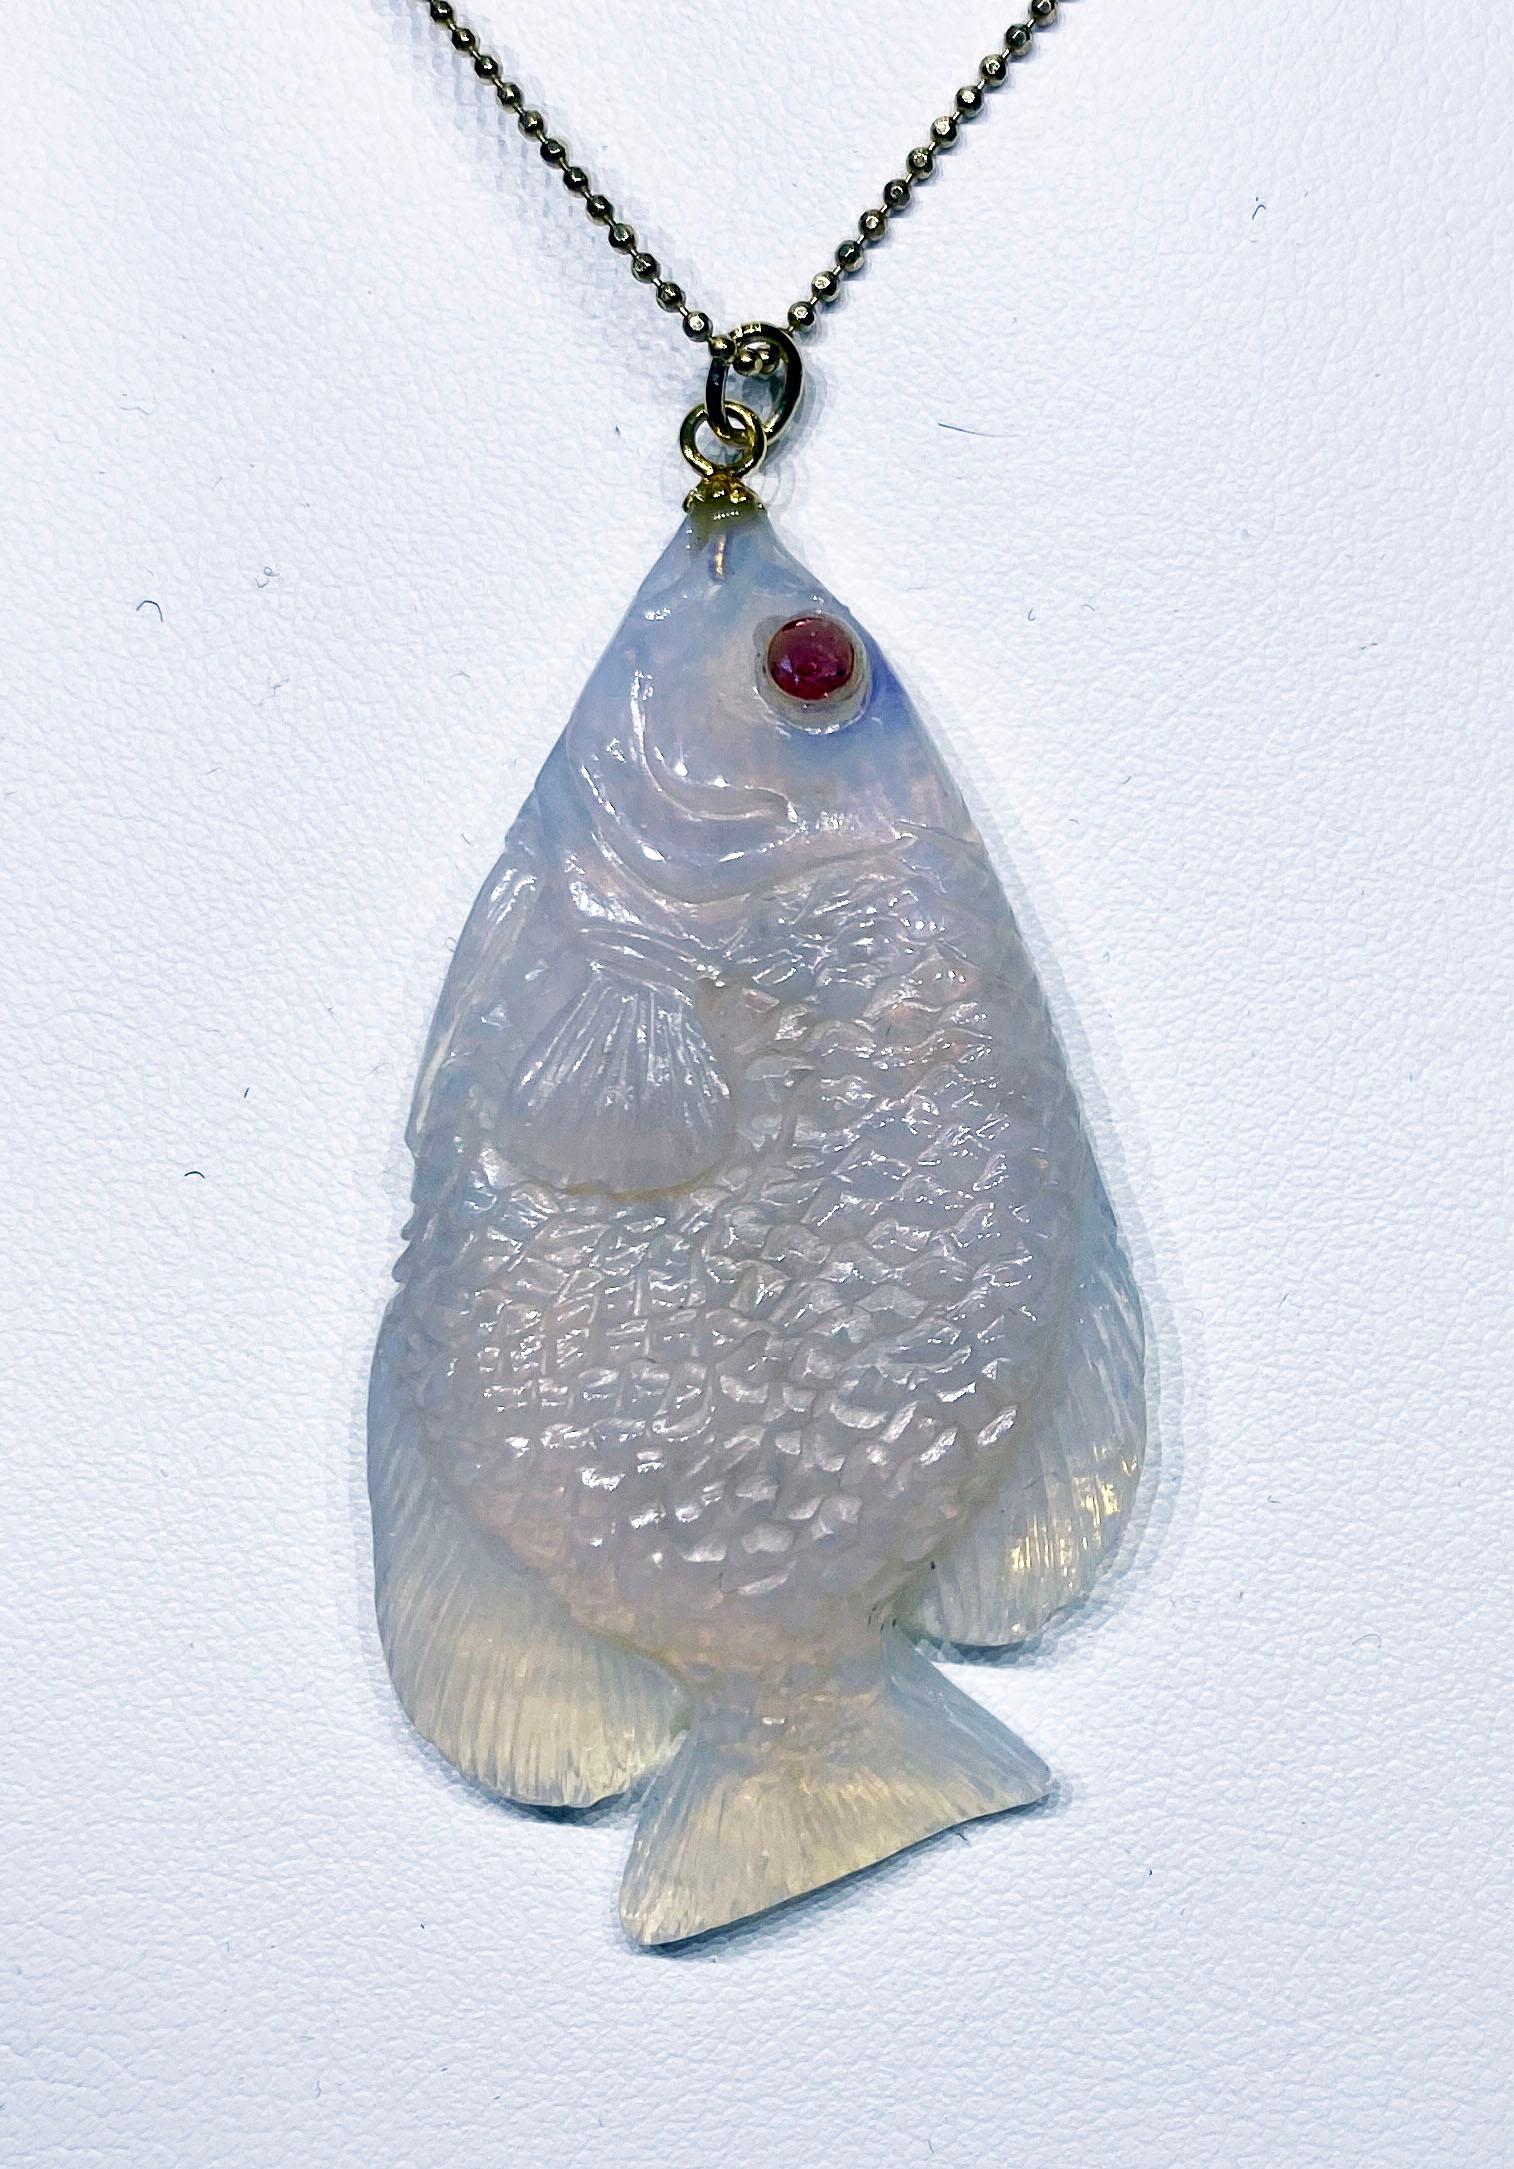 A 44 Carat Carved Opal Fish Pendant with Red Sapphire Eyes. This pendant is hanging from a Gold Plated Silver chain of 20 Inches. The Opal Pendant is 1 Inch Wide and 2.25 Inches Long.

Originally from San Diego, California, Kary Adam lived in the